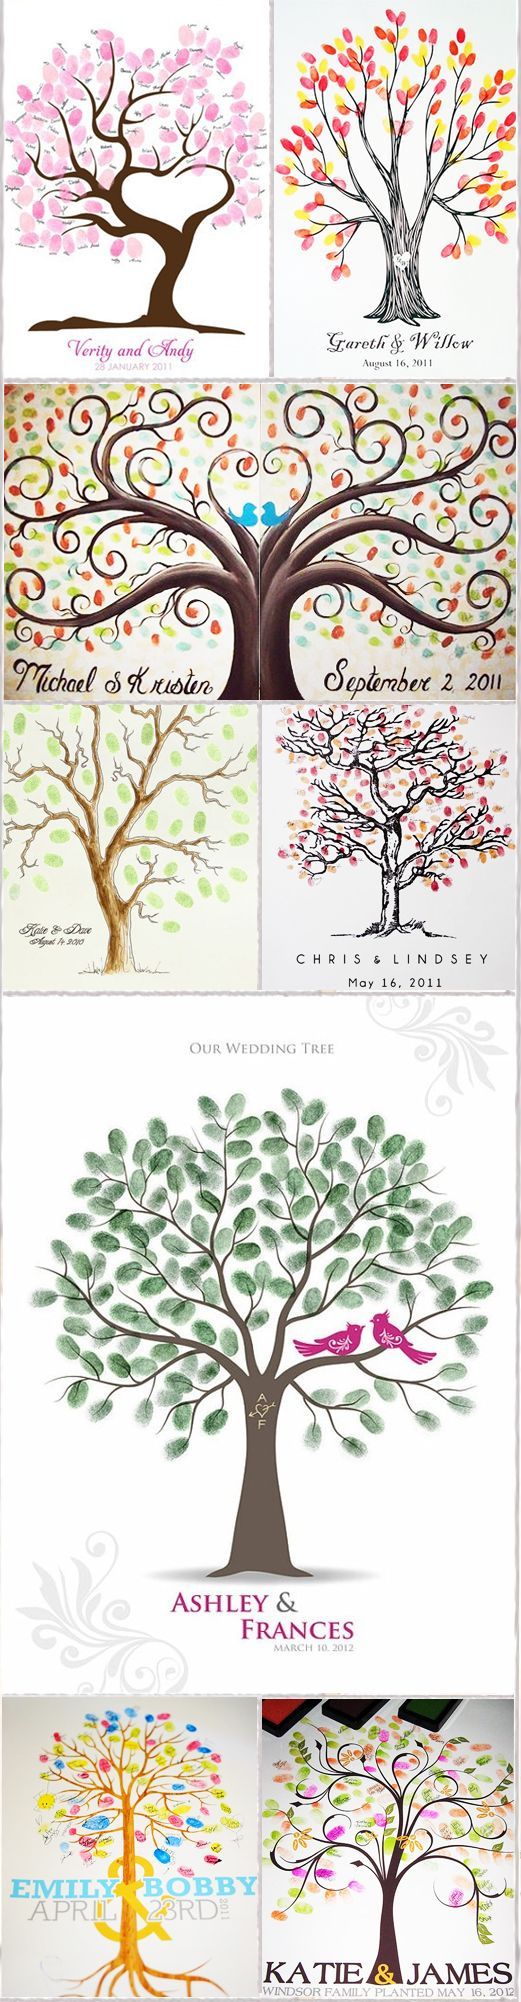 Wedding Tree~The leaves are made of fingerprints from each guest at the wedding!